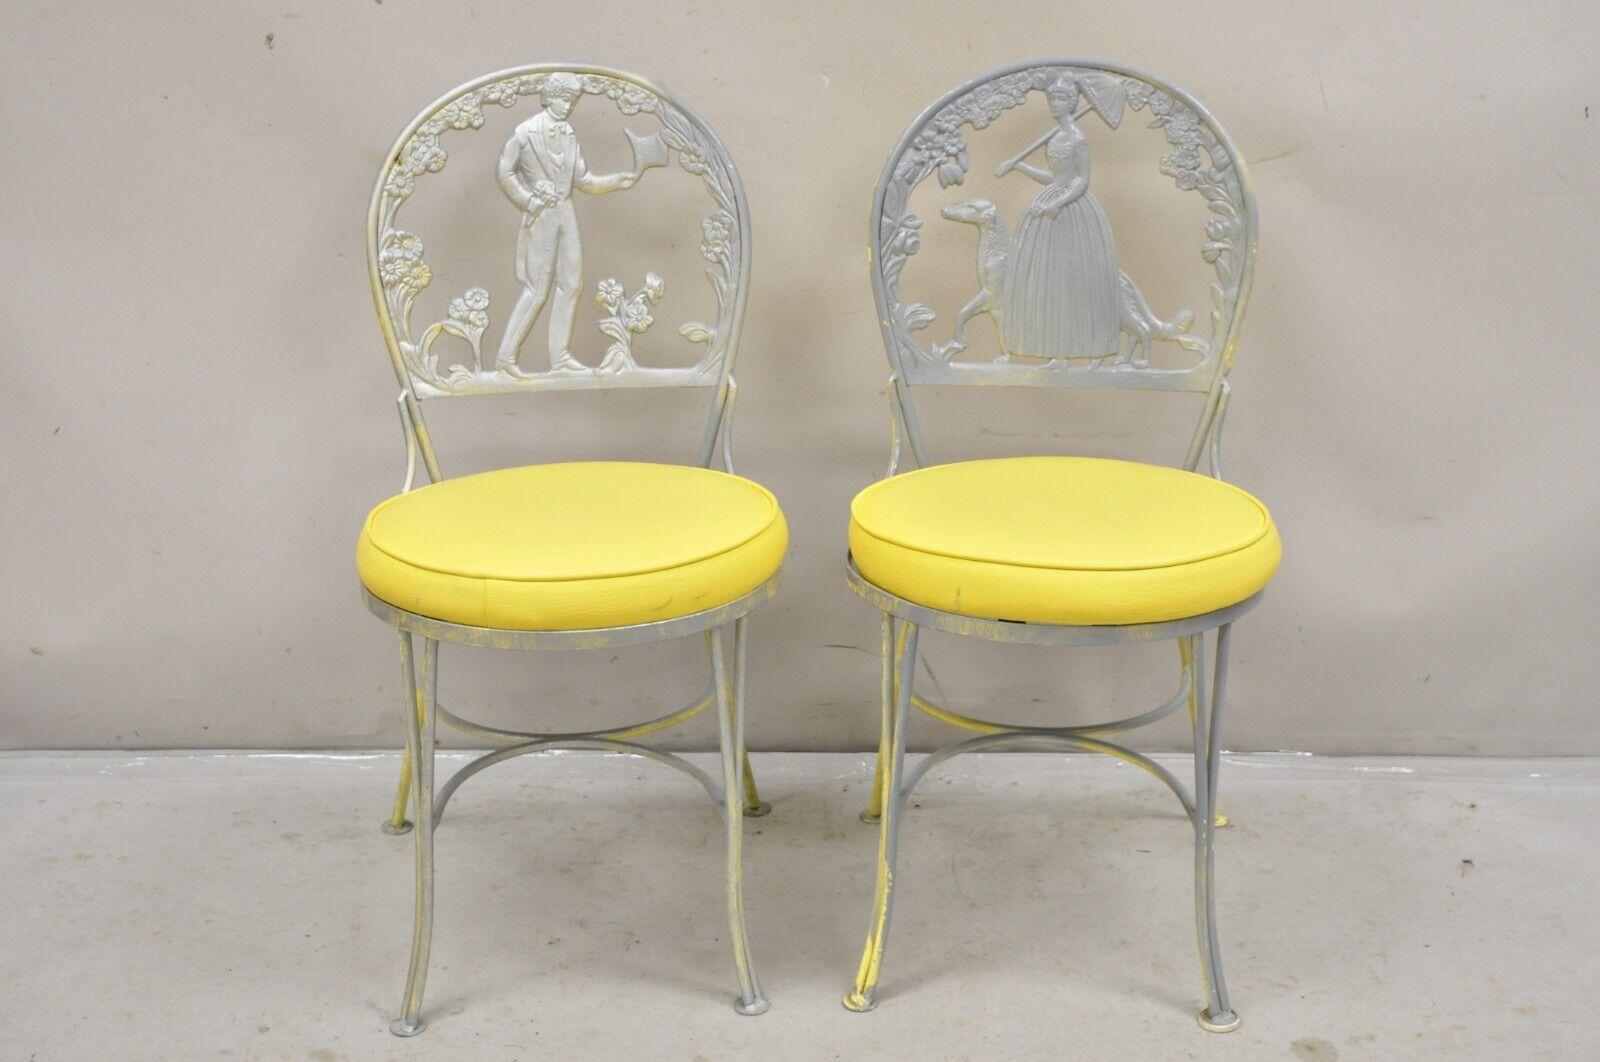 Victorian Style Cast Aluminum Courting Scene Garden Patio Bistro Chairs - a Pair 7